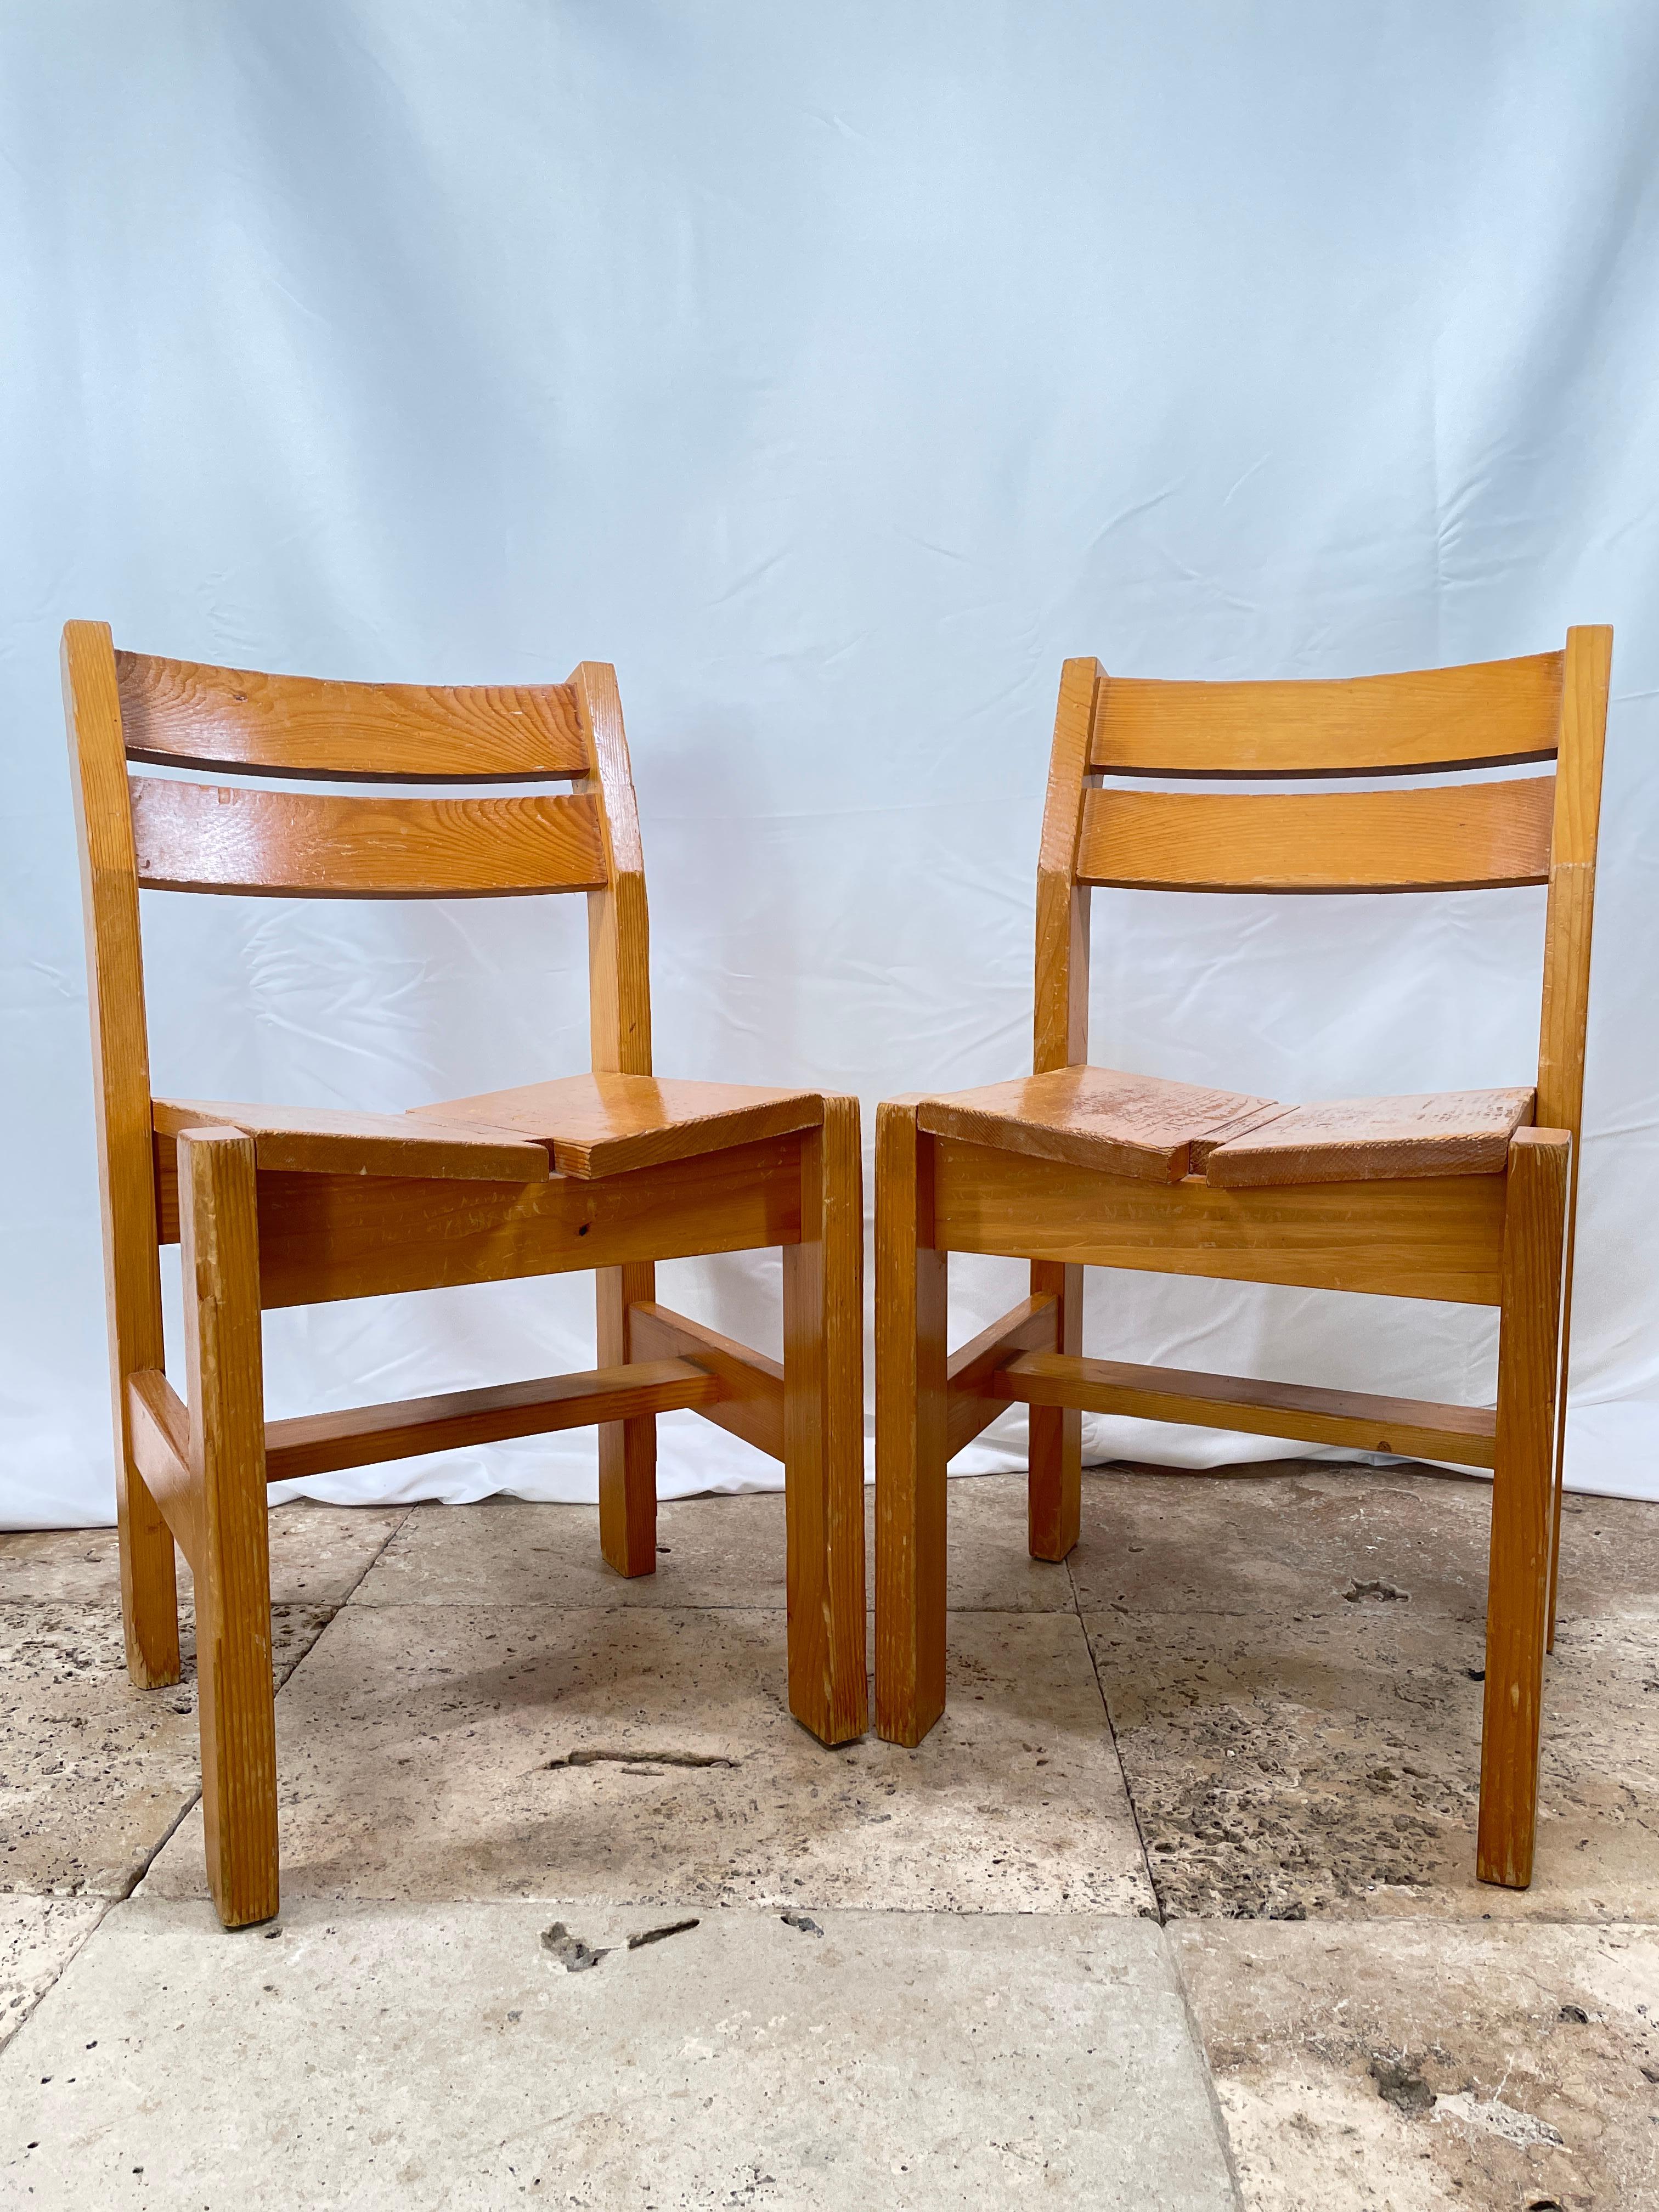 Rare set of chairs by Charlotte Perriand. Chairs were designed for La Cascade, the grouping of tilted apartments at Les Arcs 1600 ski resort. Made in the mid-1960s La Cascade is the second building built in Arc 1600 in 1969, and the first one